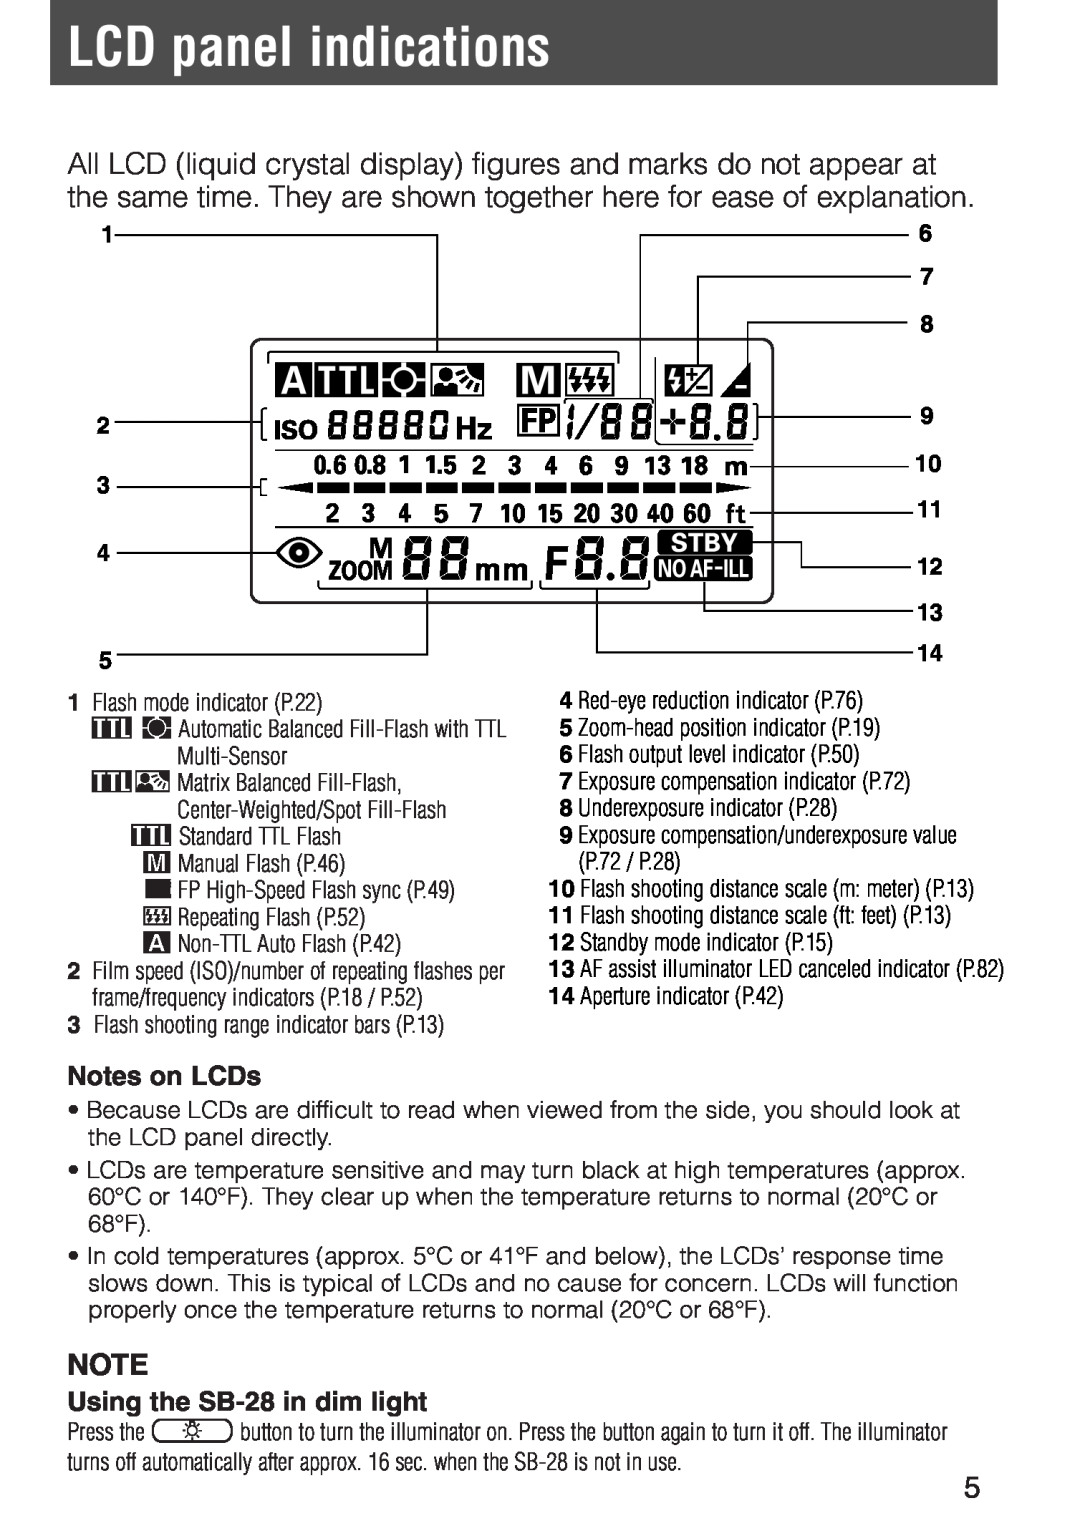 Nikon instruction manual LCD panel indications, Notes on LCDs, Using the SB-28in dim light 